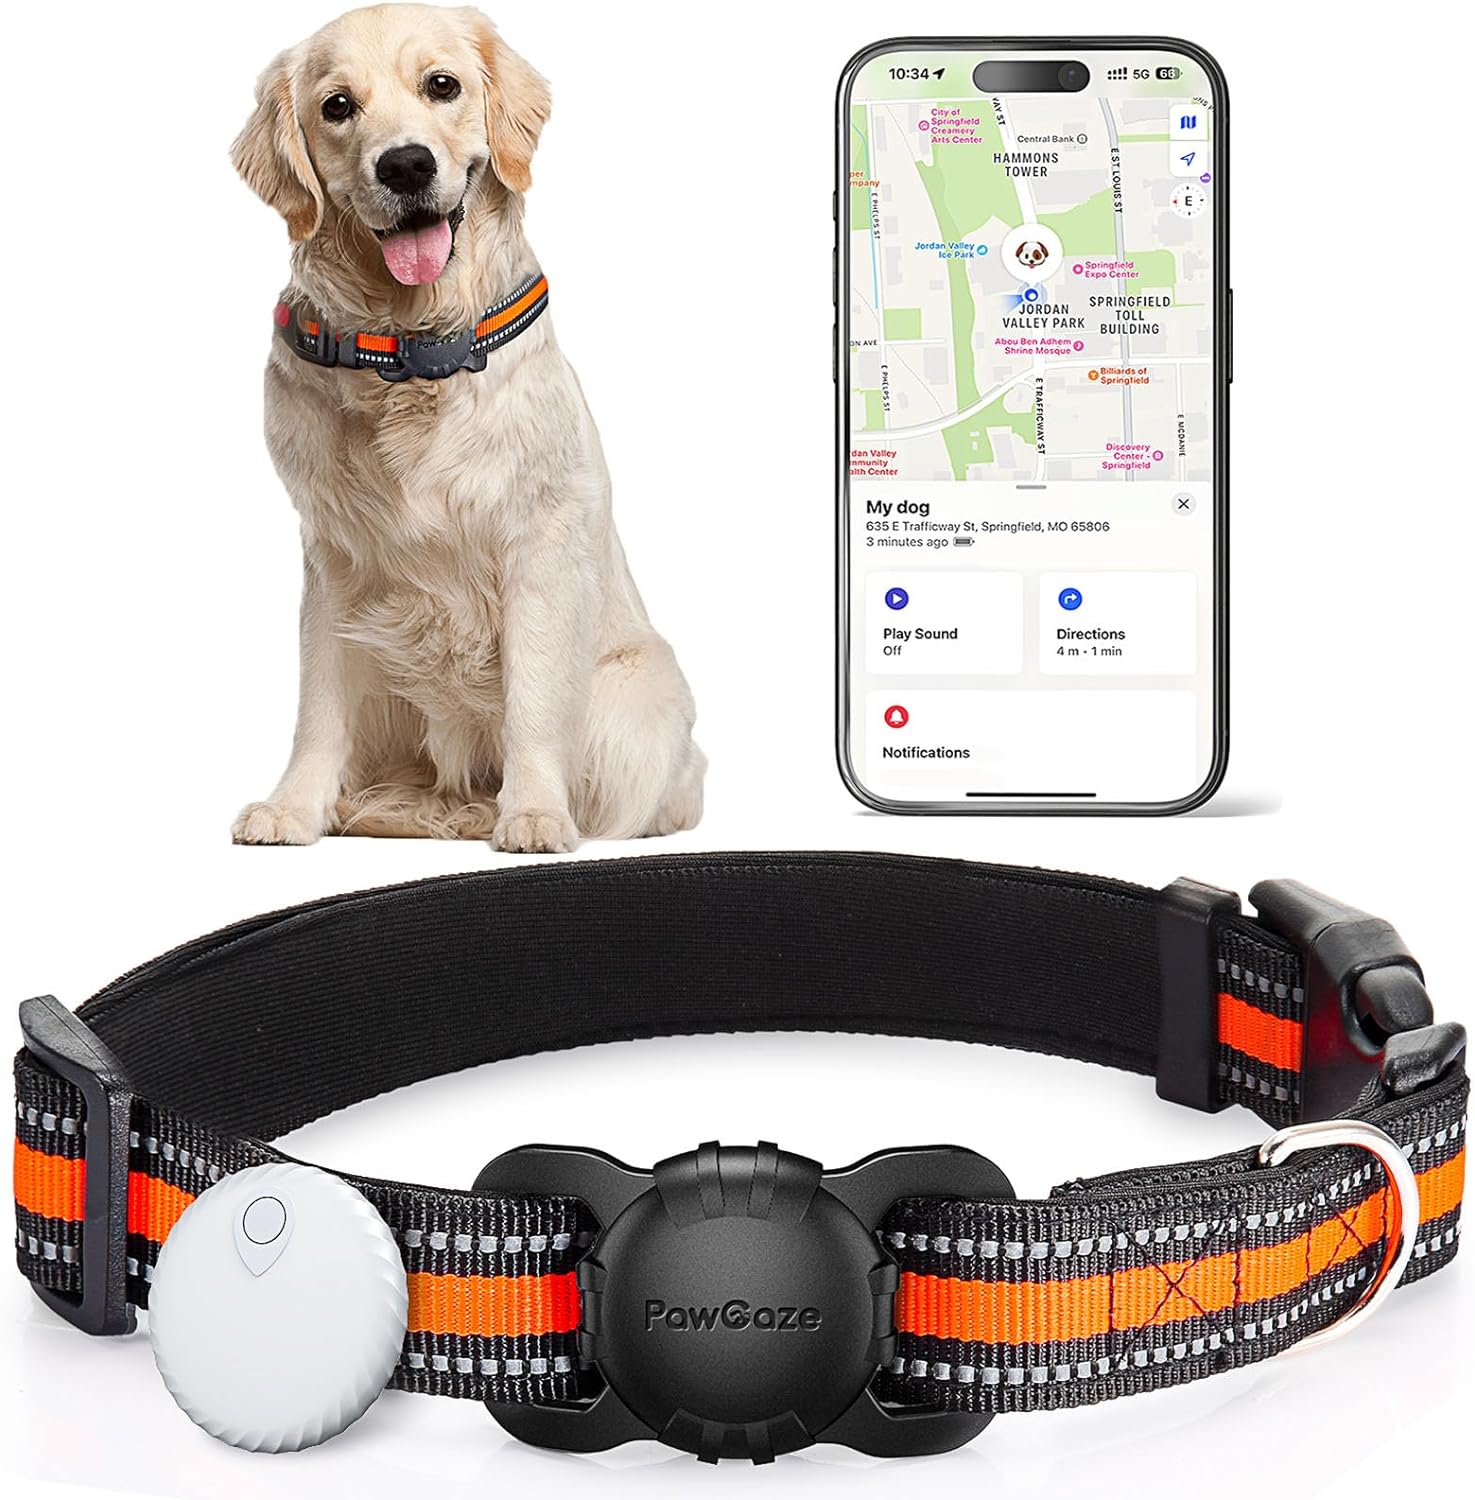 Dog Tracker Collar, No Monthly Fee Cat Tracker Collar (Only iOS), Compatible with Apple FindMy App, Reflective FinderTag Smart Collars, Anti-Lost, Key Finder for Vehicles/Pets/Kids/Items